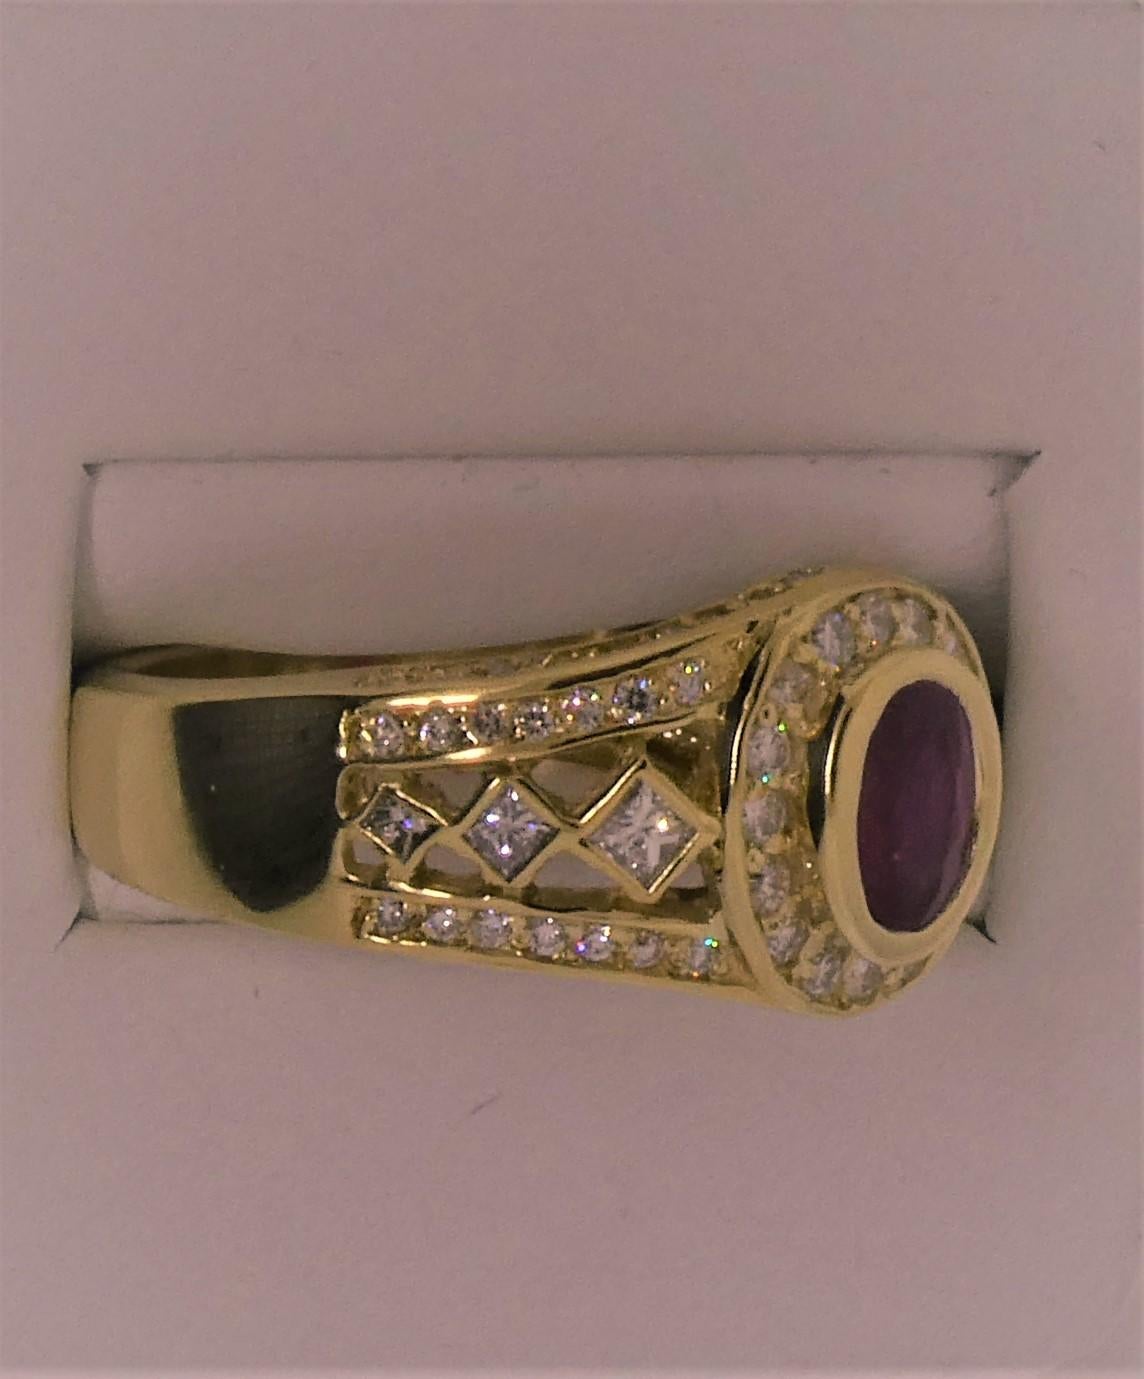 This 18 Karat yellow gold ring, contains a Burmese Ruby measuring 7.08 x 5.81 x 2.68 mm.  As we did not make the ring, we estimate the weight of the Ruby at 0.85 carats.  The ruby is certified by the Gemological Institute of America as Burmese